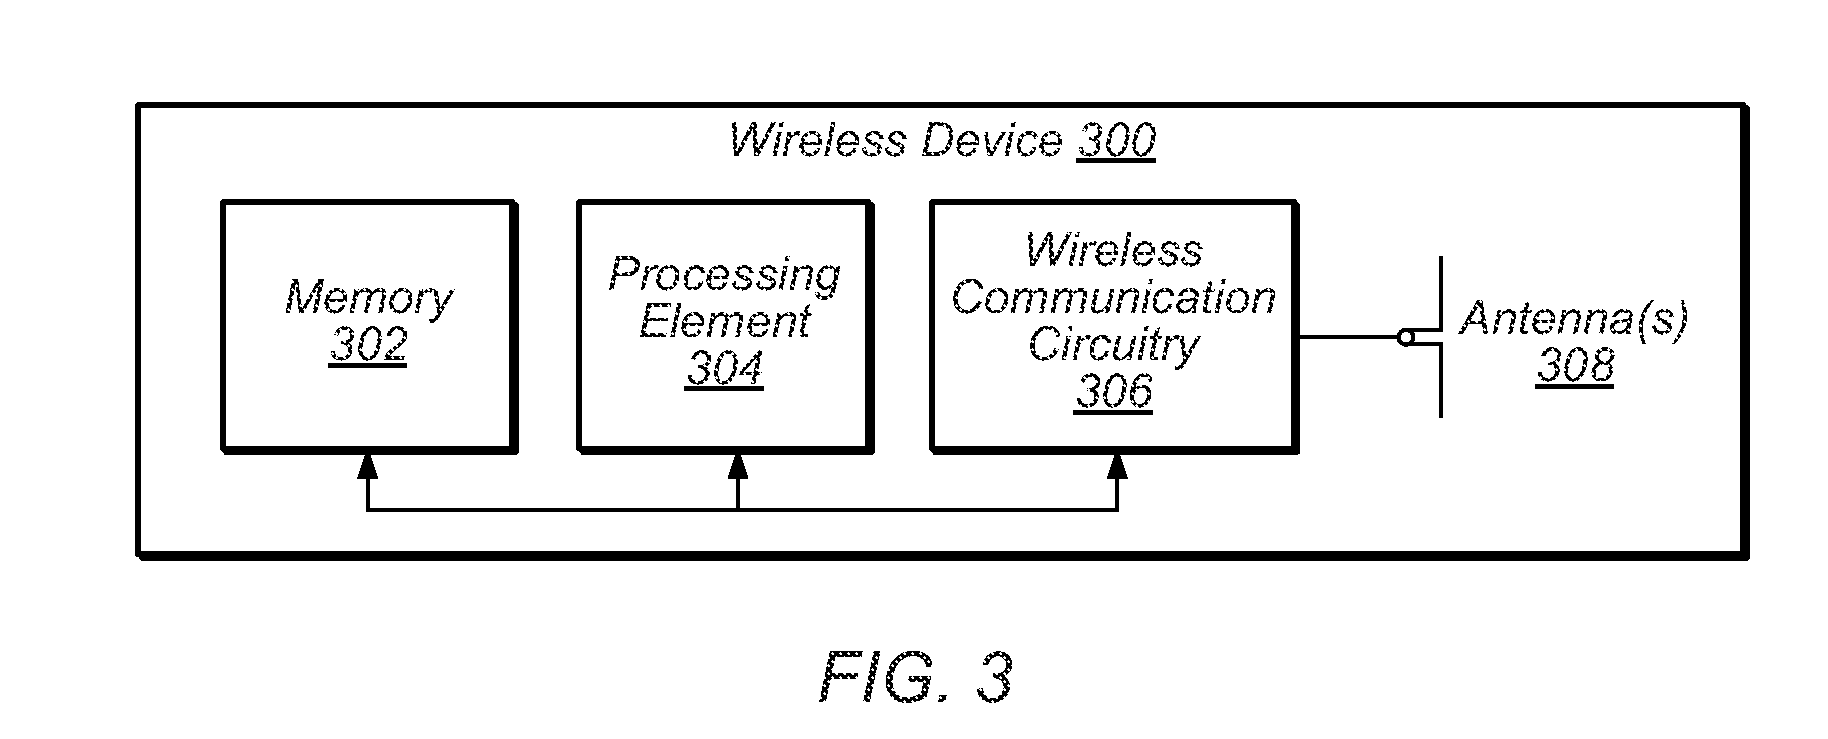 Early Termination of Reception of Wireless Transmissions